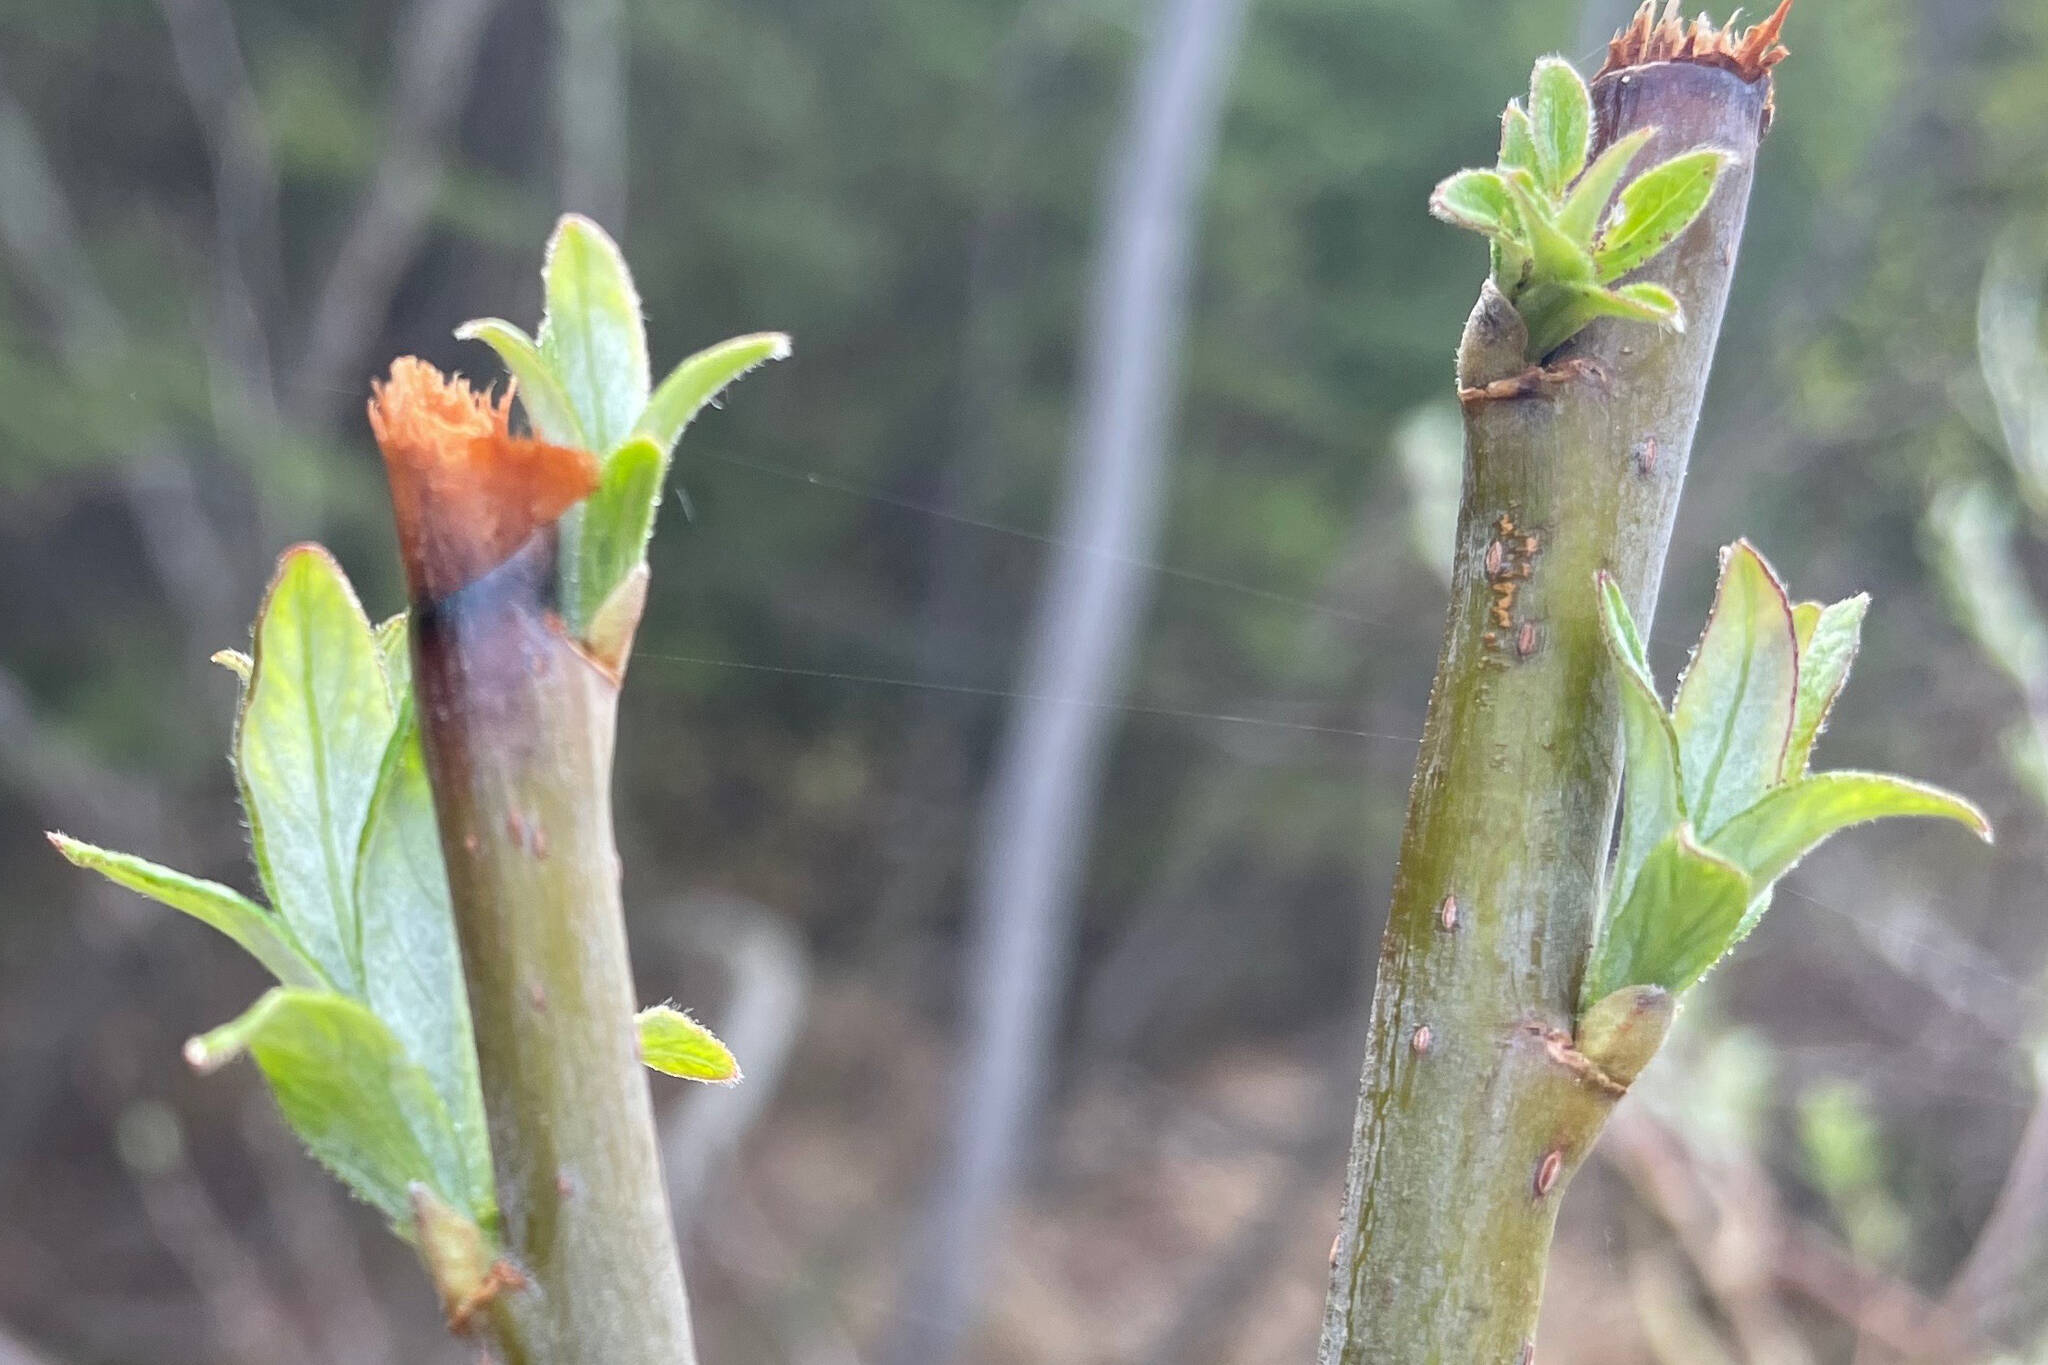 Feltleaf willow leaves emerge beneath where a moose nipped off buds during winter of 2022-2023 in Fairbanks. (Courtesy Photo / Ned Rozell)